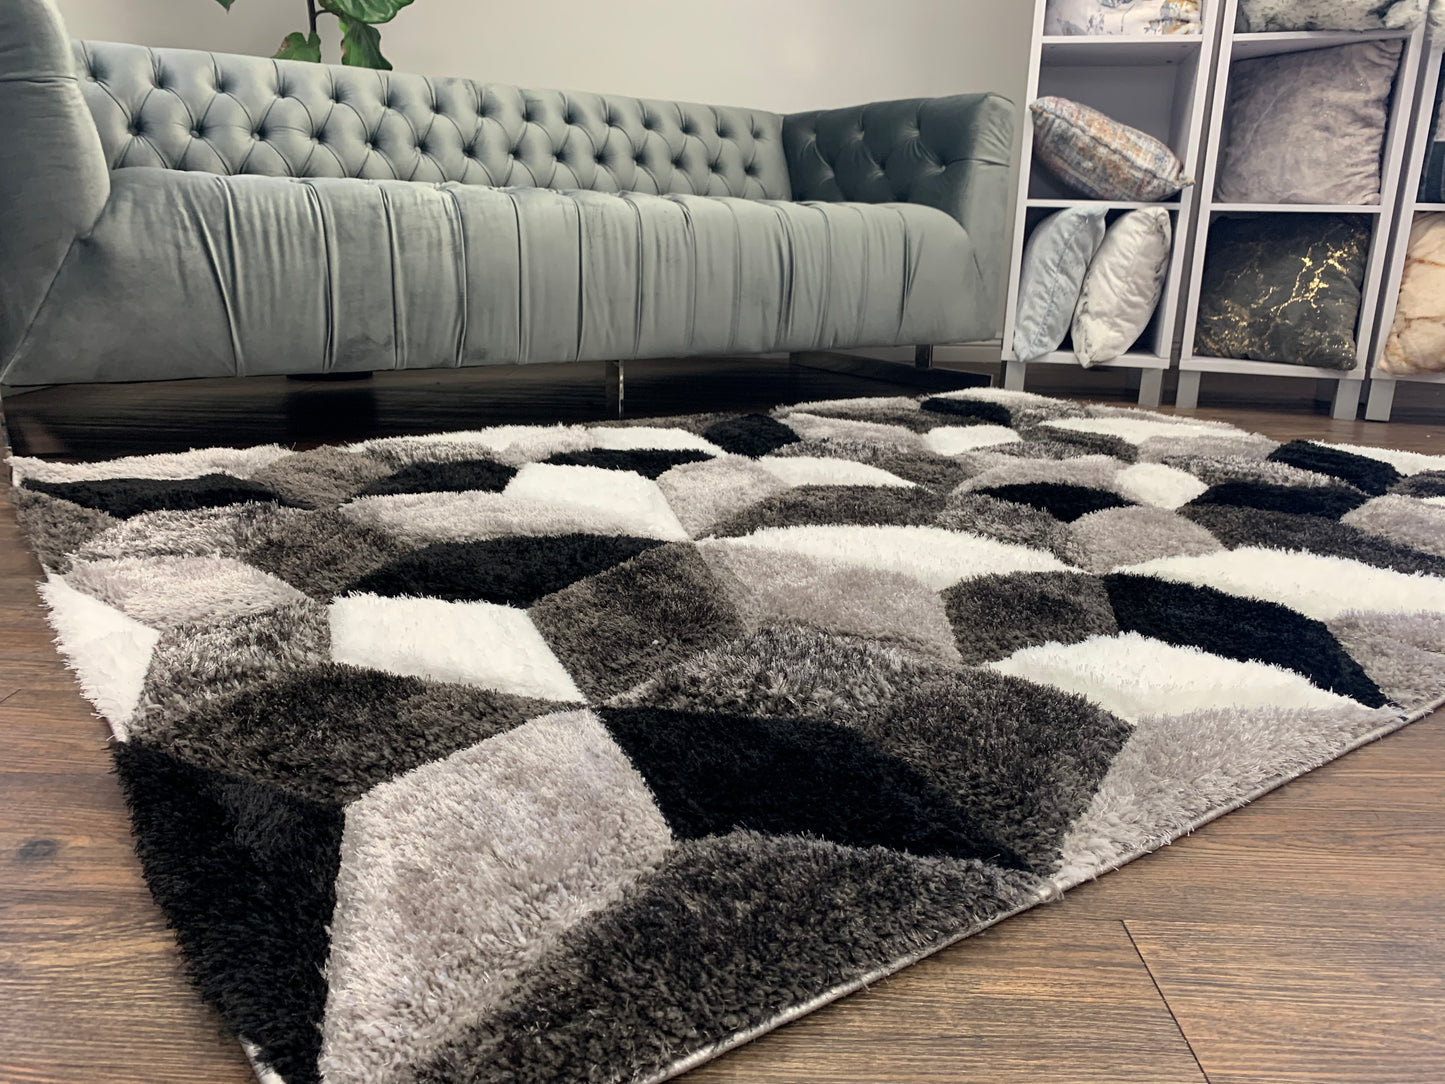 Silver Black White Shag Area Rug/Carpet | Style# SR-729 - Crafted from 100% Polyester, Plush Fluffy Shine 3D Geometric Design